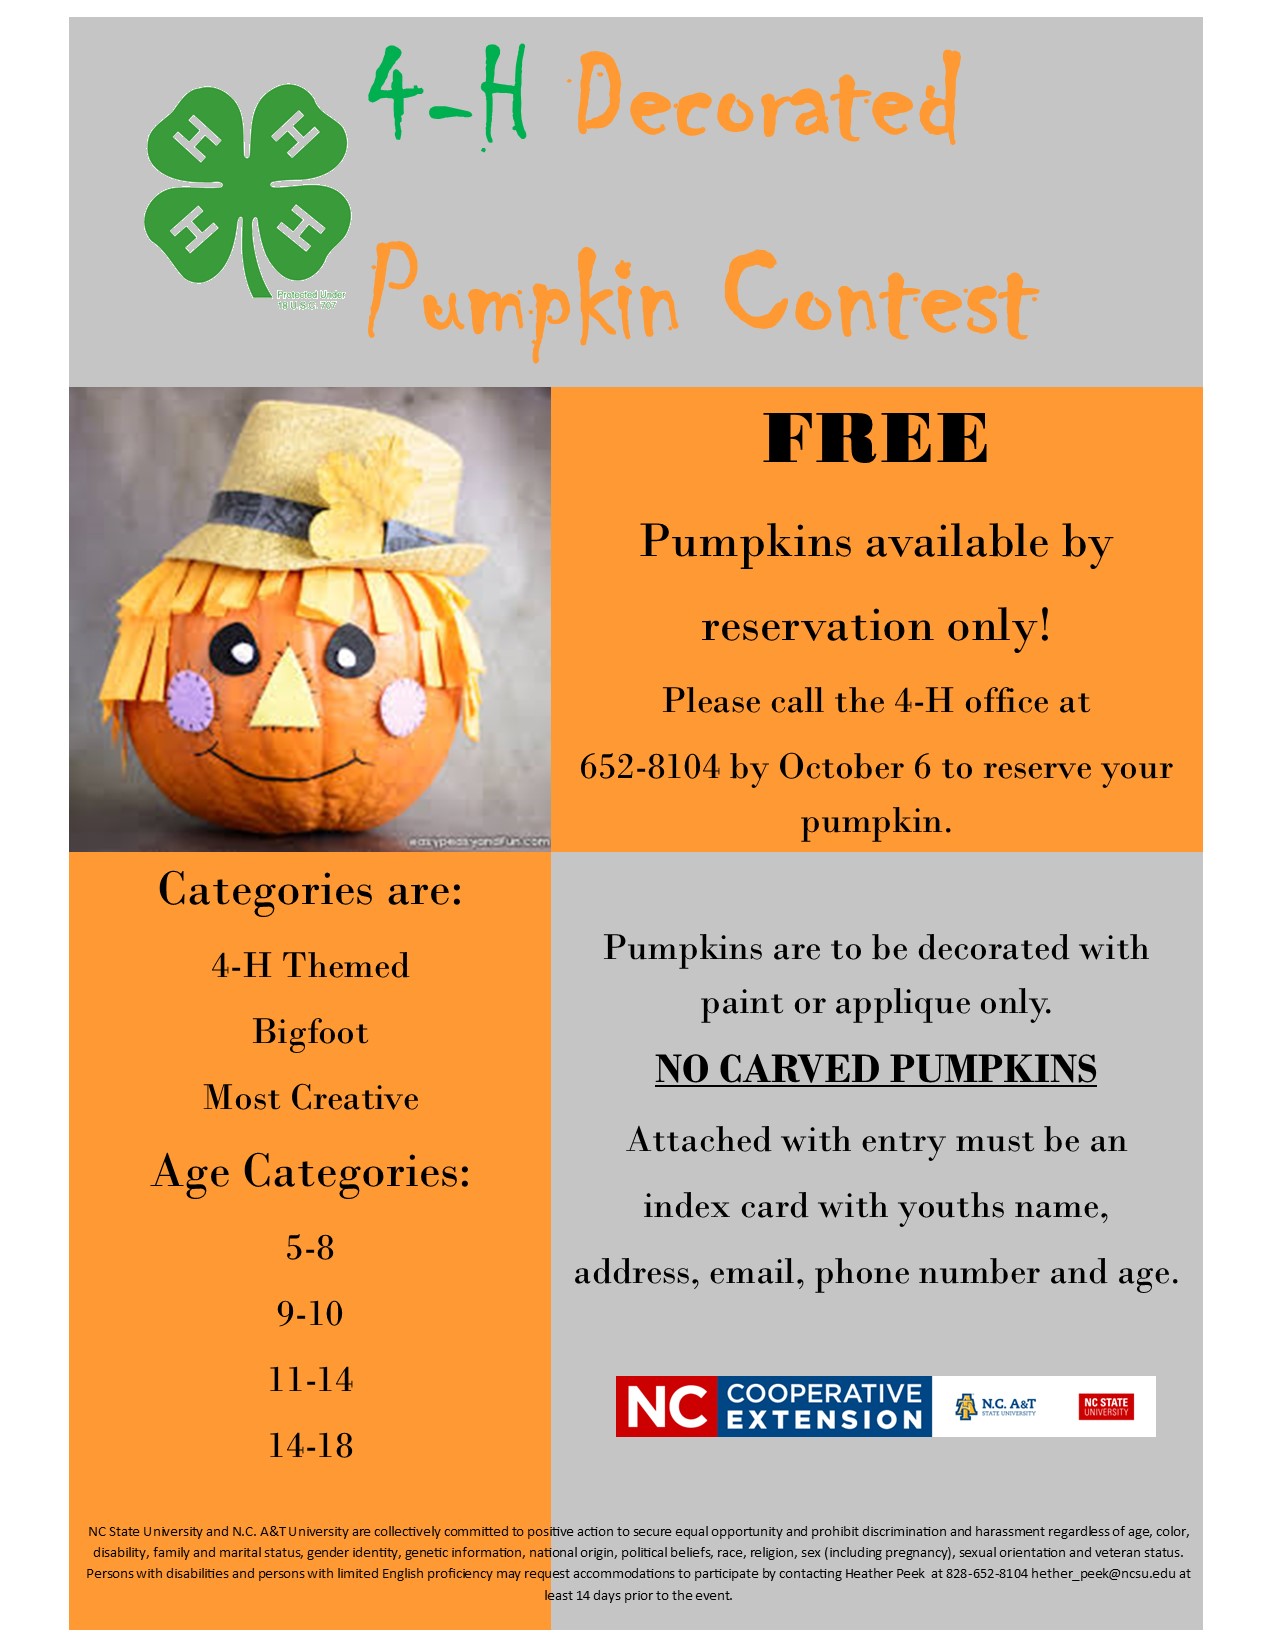 mcdowell-county-4-h-decorated-pumpkin-contest-n-c-cooperative-extension